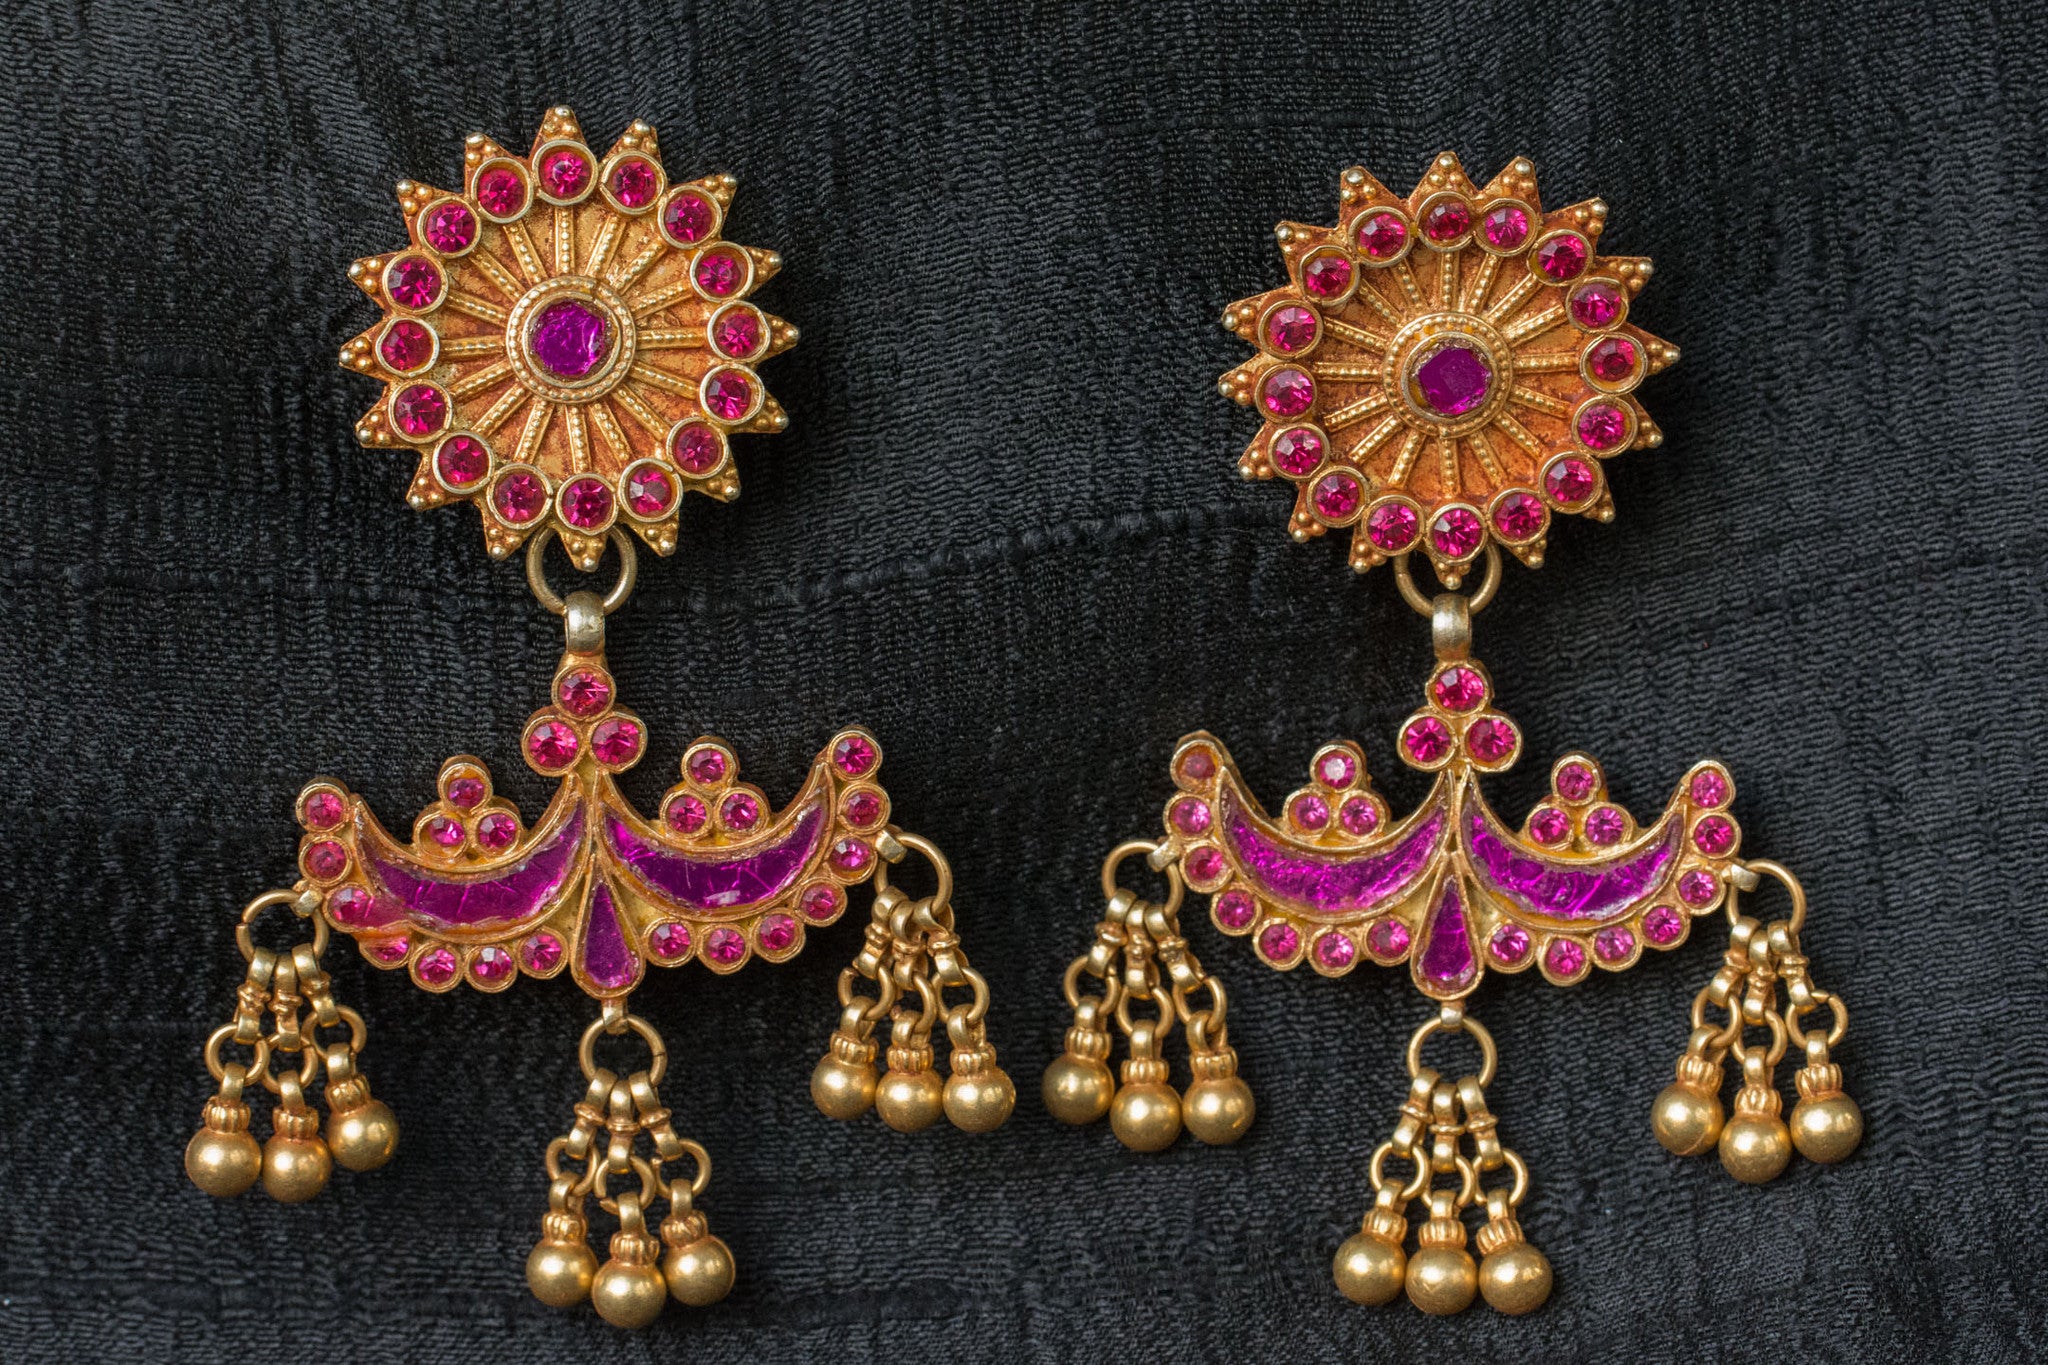 20a496-silver-gold-plated-amrapali-earrings-raised-design-starburst-chandelier-pink-purple-glass